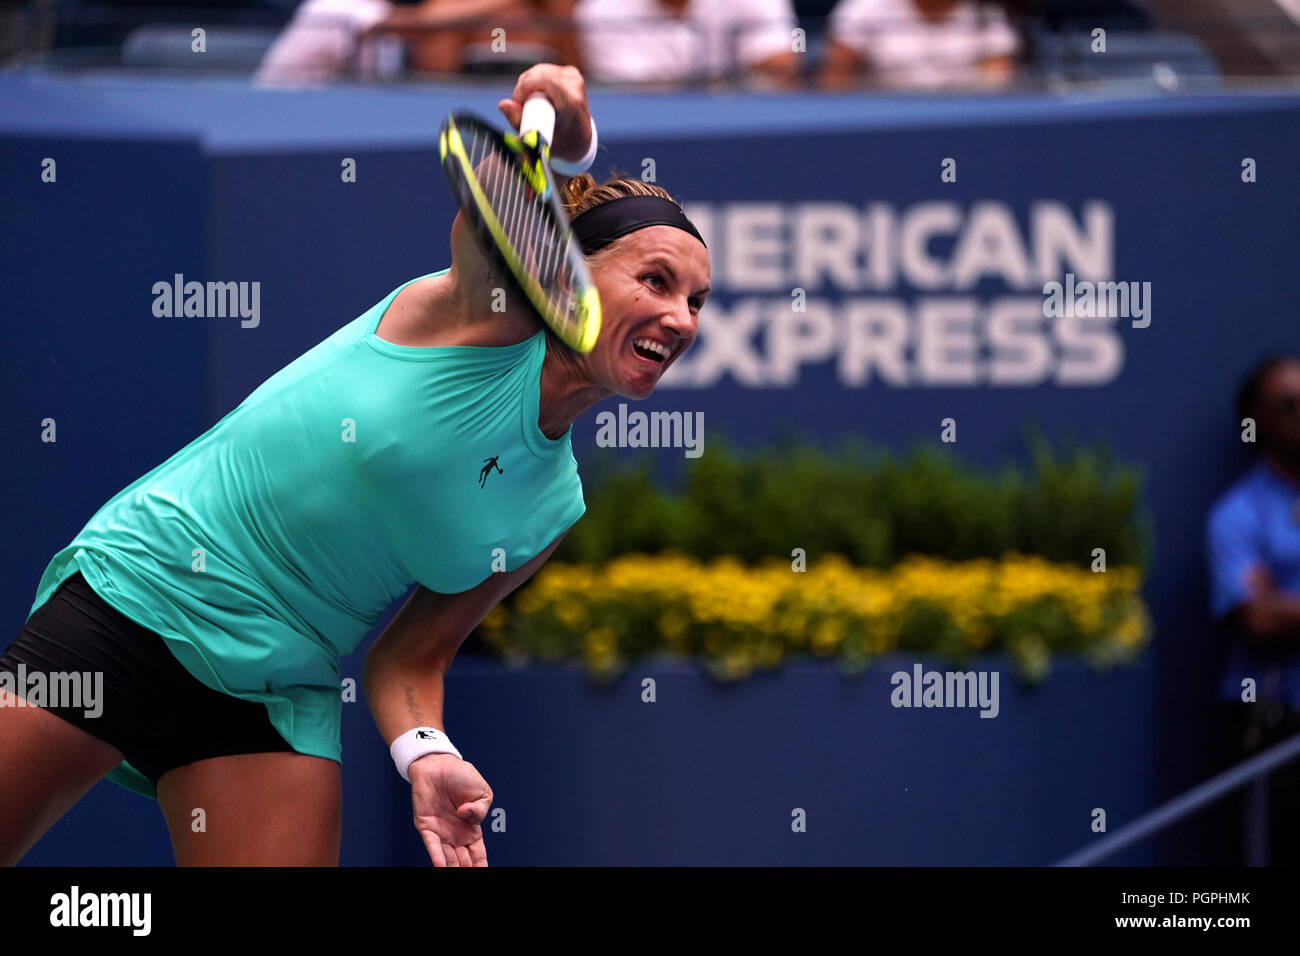 New York, United States. 27th Aug, 2018. Flushing Meadows, New York - August 27, 2018: US Open Tennis: Svetlana Kuznetsova of Russia in action during her first round match against Venus Williams of the United States on opening day at the US Open in Flushing Meadows, New York. Williams won the match in three sets to advance to the second round. Credit: Adam Stoltman/Alamy Live News Stock Photo